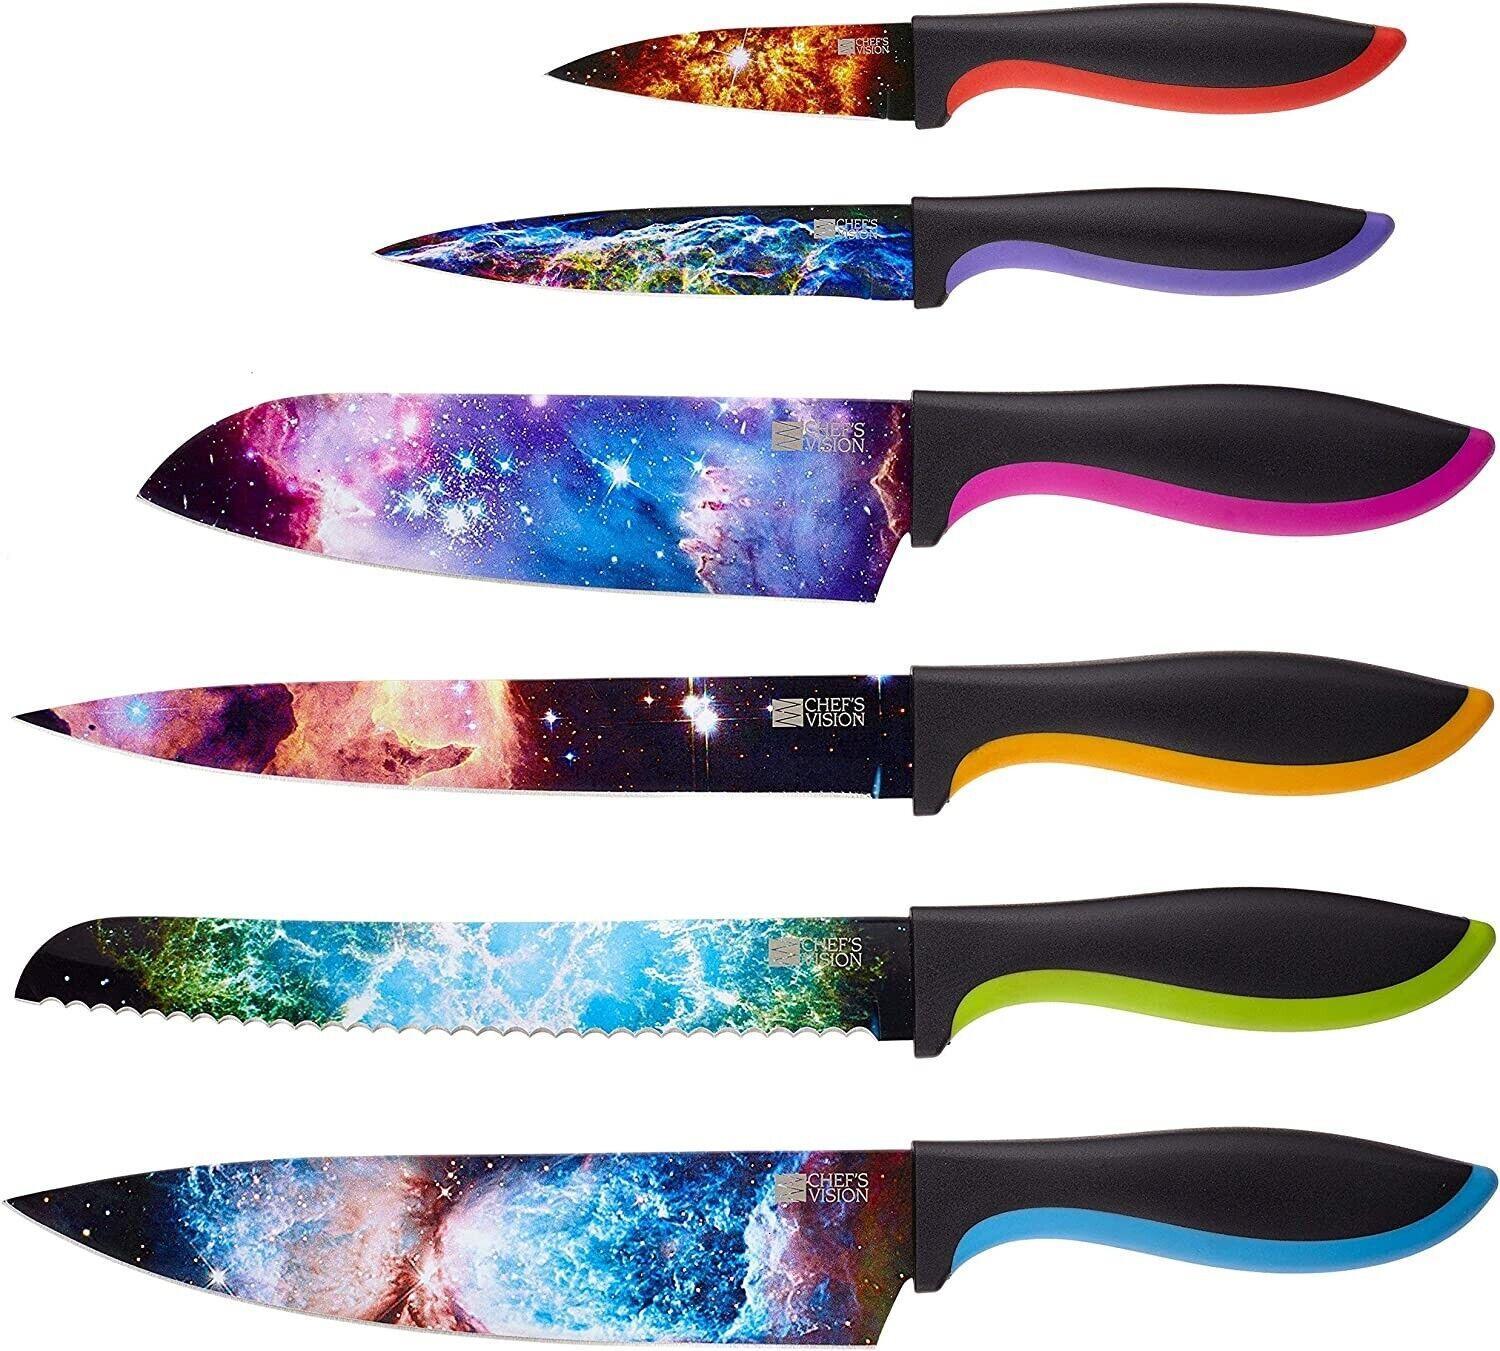 6x Cosmos Series Kitchen Knife Set Unique Cooking Chef Knives Colorful Gift